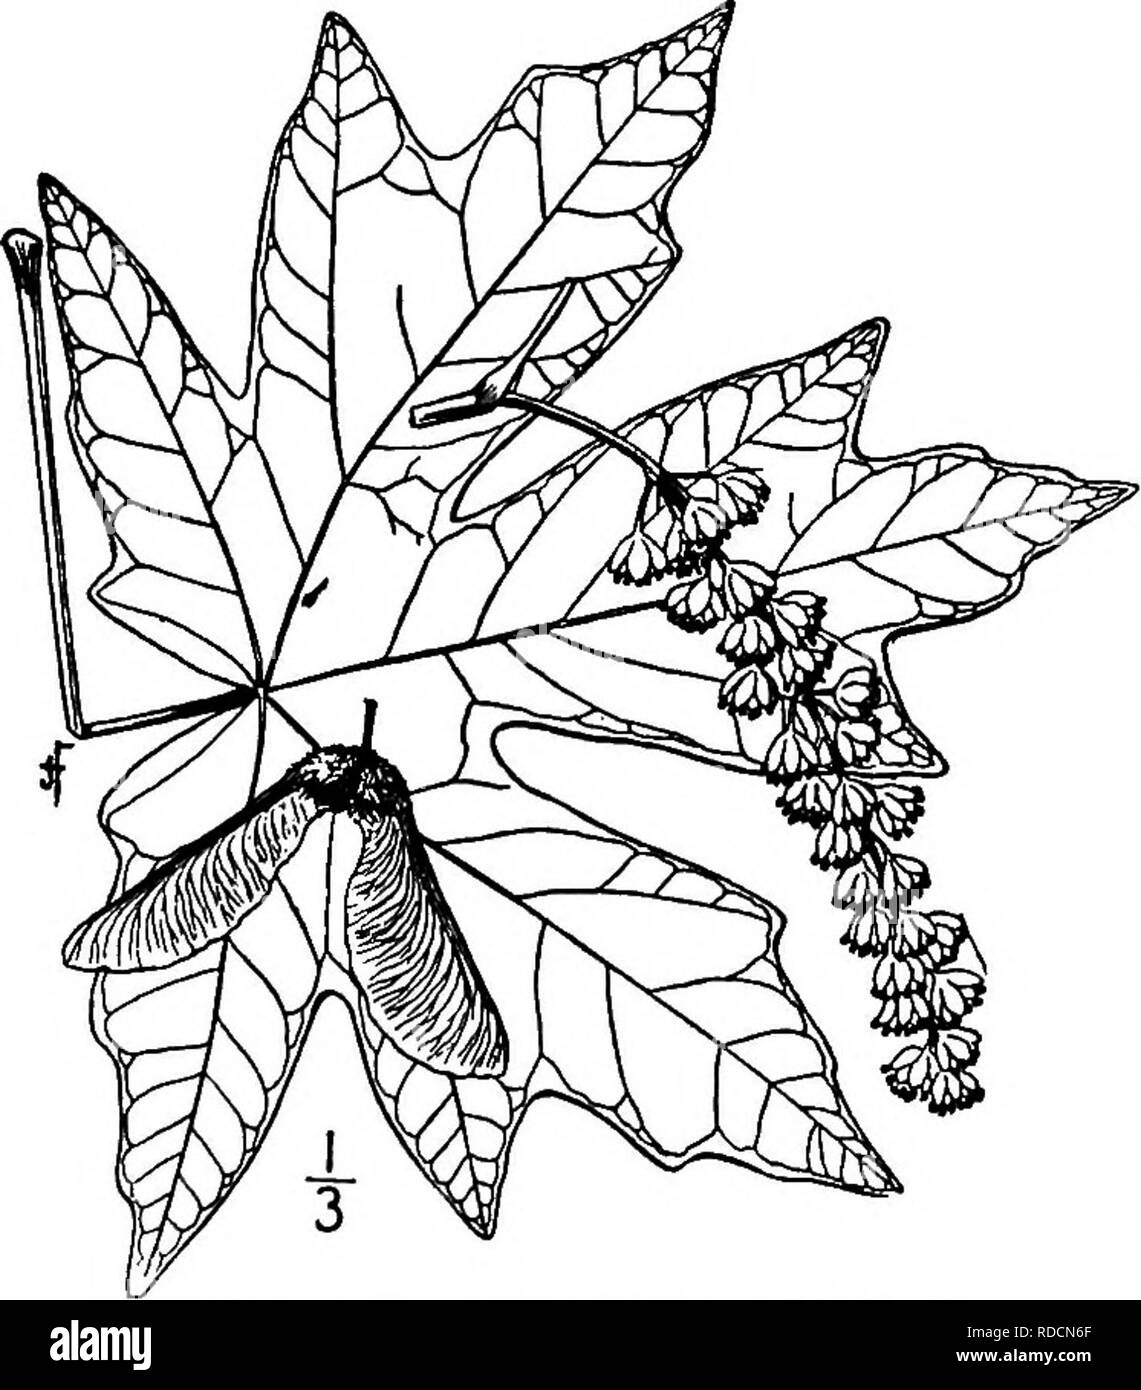 . North American trees : being descriptions and illustrations of the trees growing independently of cultivation in North America, north of Mexico and the West Indies . Trees. Fig. 589. — Striped Maple. 3. BROAD-LEAVED MAPLE —Acer macrophyUum Pursh A forest tree of the Pacific coast, attaining a height of at least 32 meters and a trunk diameter of about i meter, and ranging from southern Alaska to southern California, and known also as White maple. The furrowed brown bark is scaly and rather thick. The twigs are quite smooth, at first light green, red in the winter and subsequently gray. When u Stock Photo